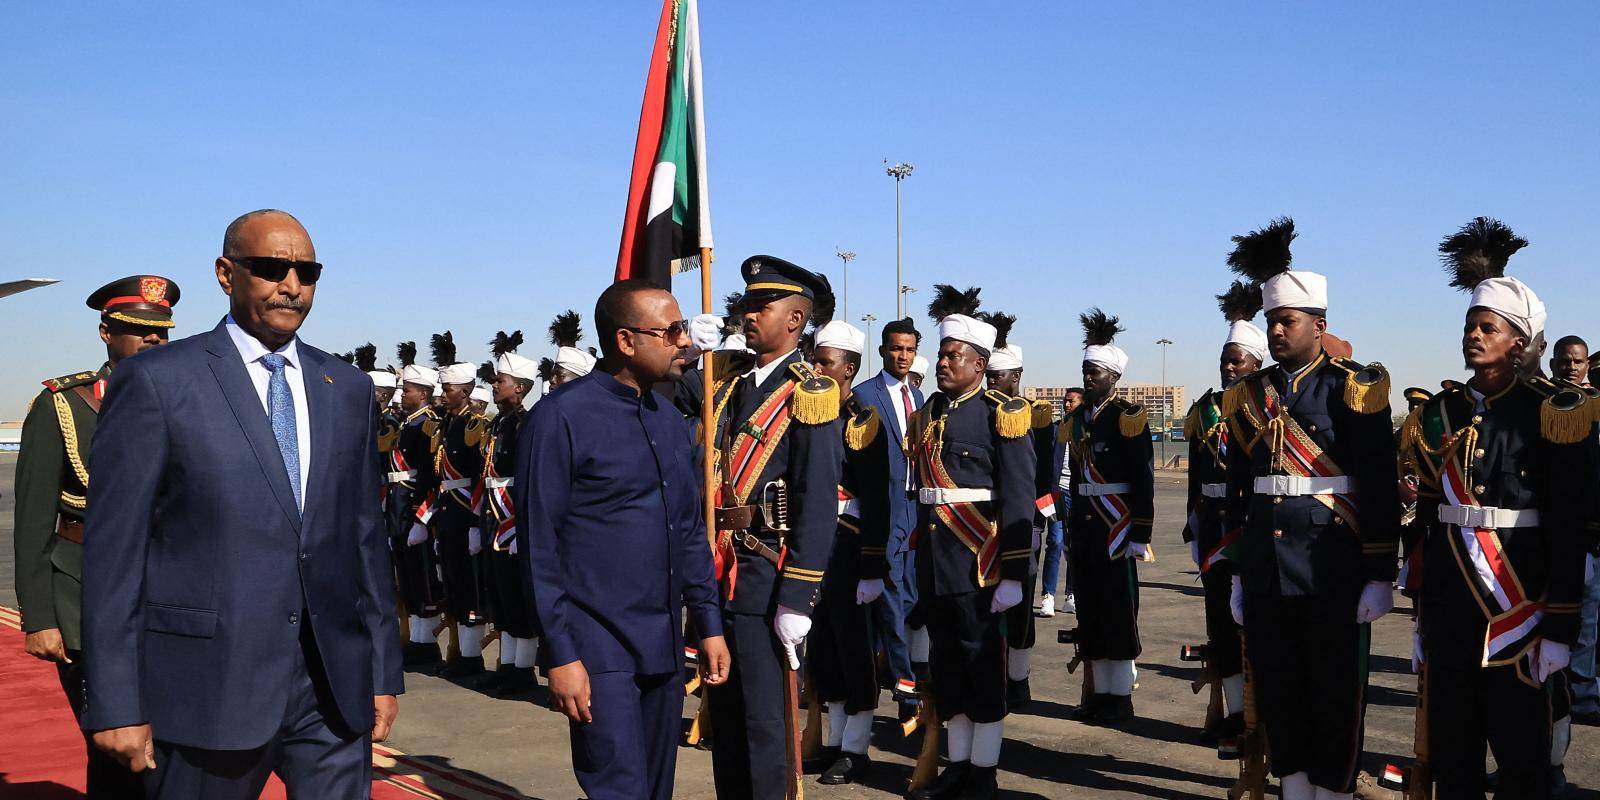 Ethiopian prime minister Abiy Ahmed and Sudanese army chief Abdel Fattah al-Burhan inspect Sudanese military personnel in full dress uniform